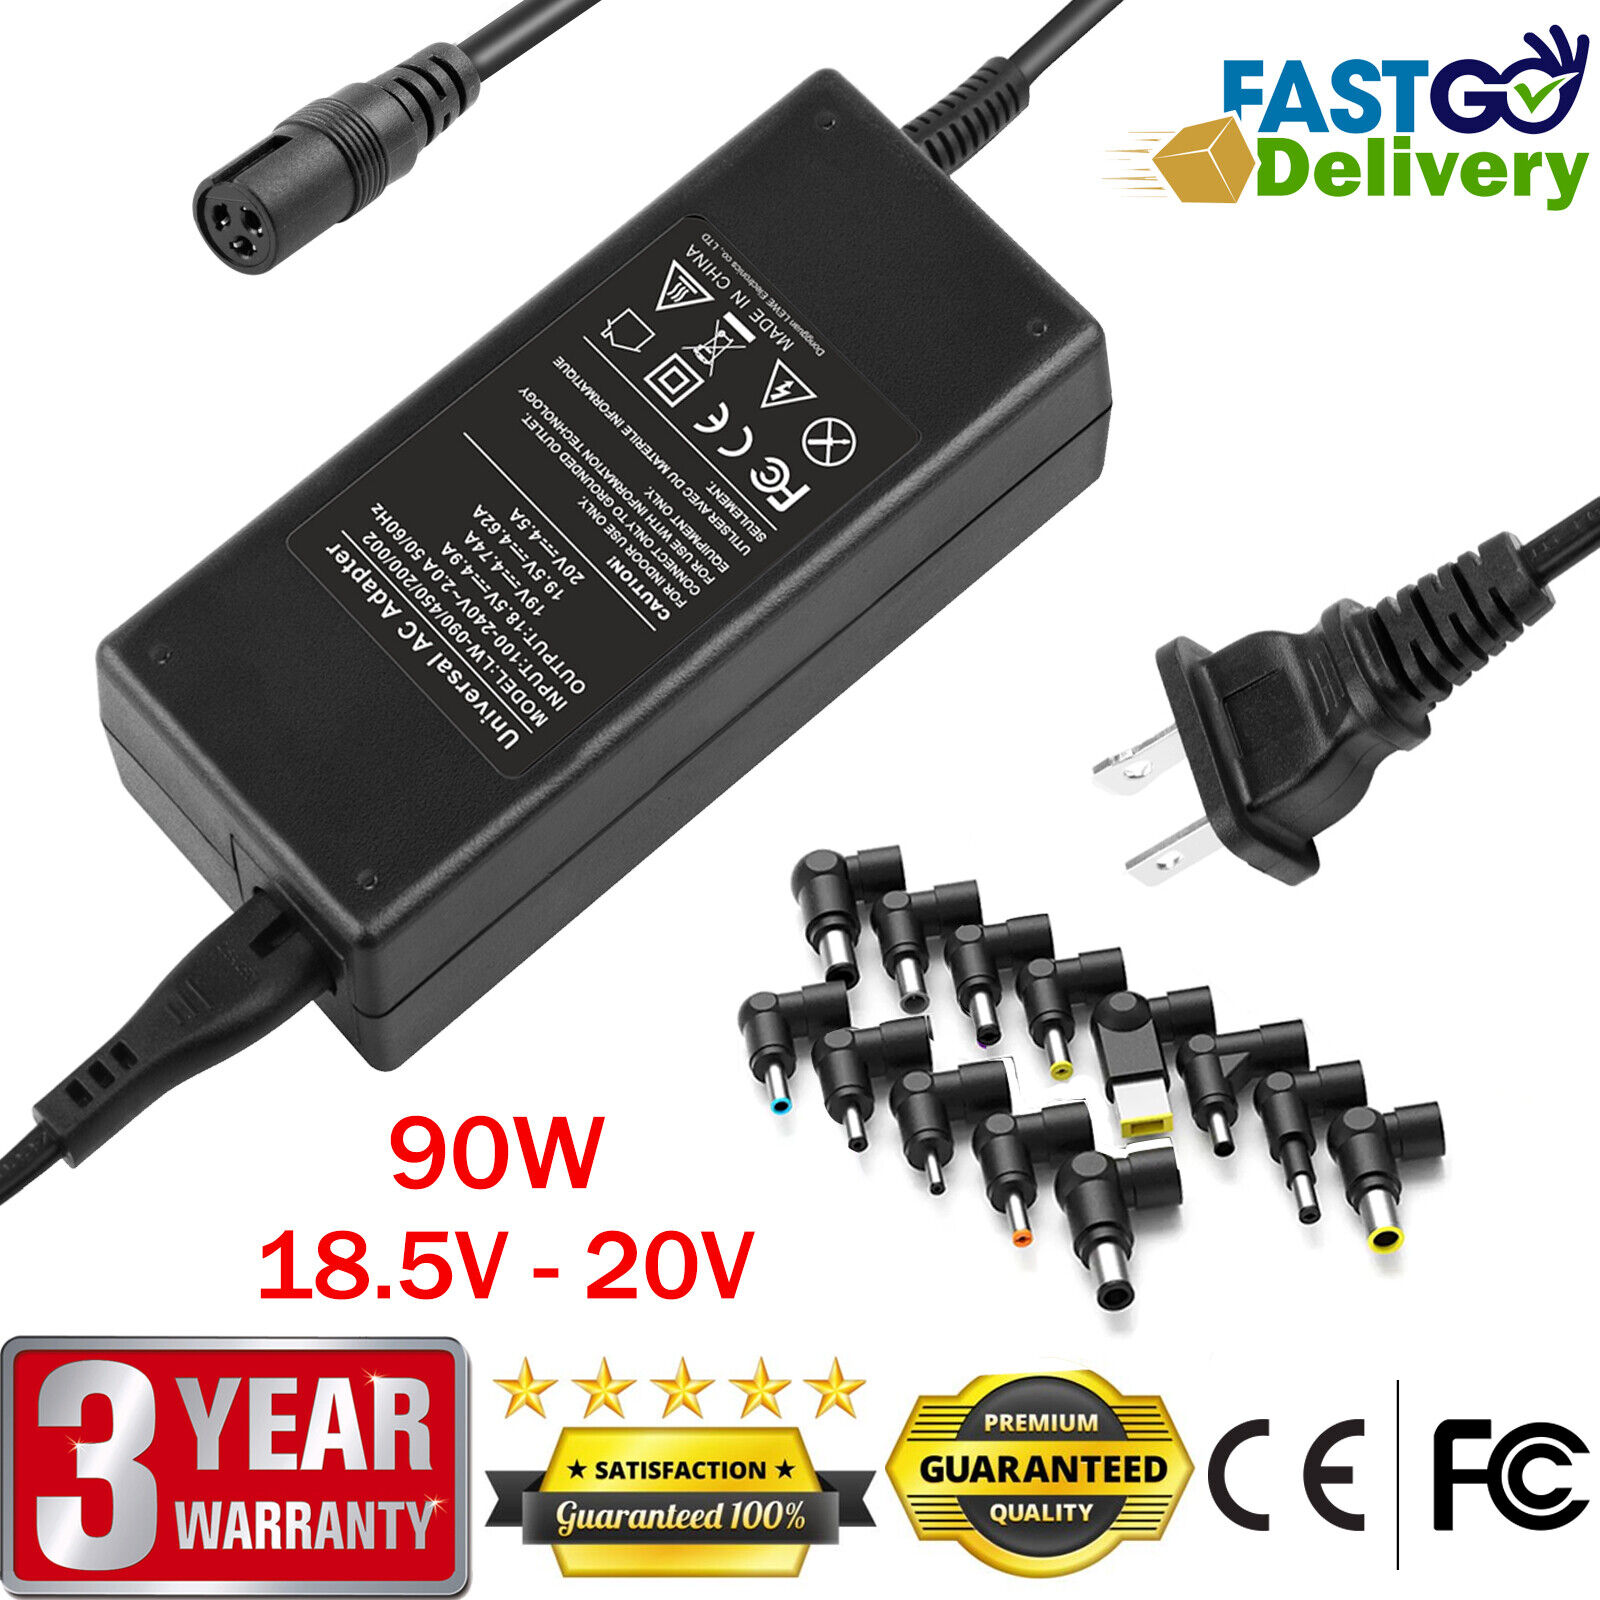 90w Universal AC Laptop Charger Adapter for HP Compaq Dell Acer Asus Lenovo Sony